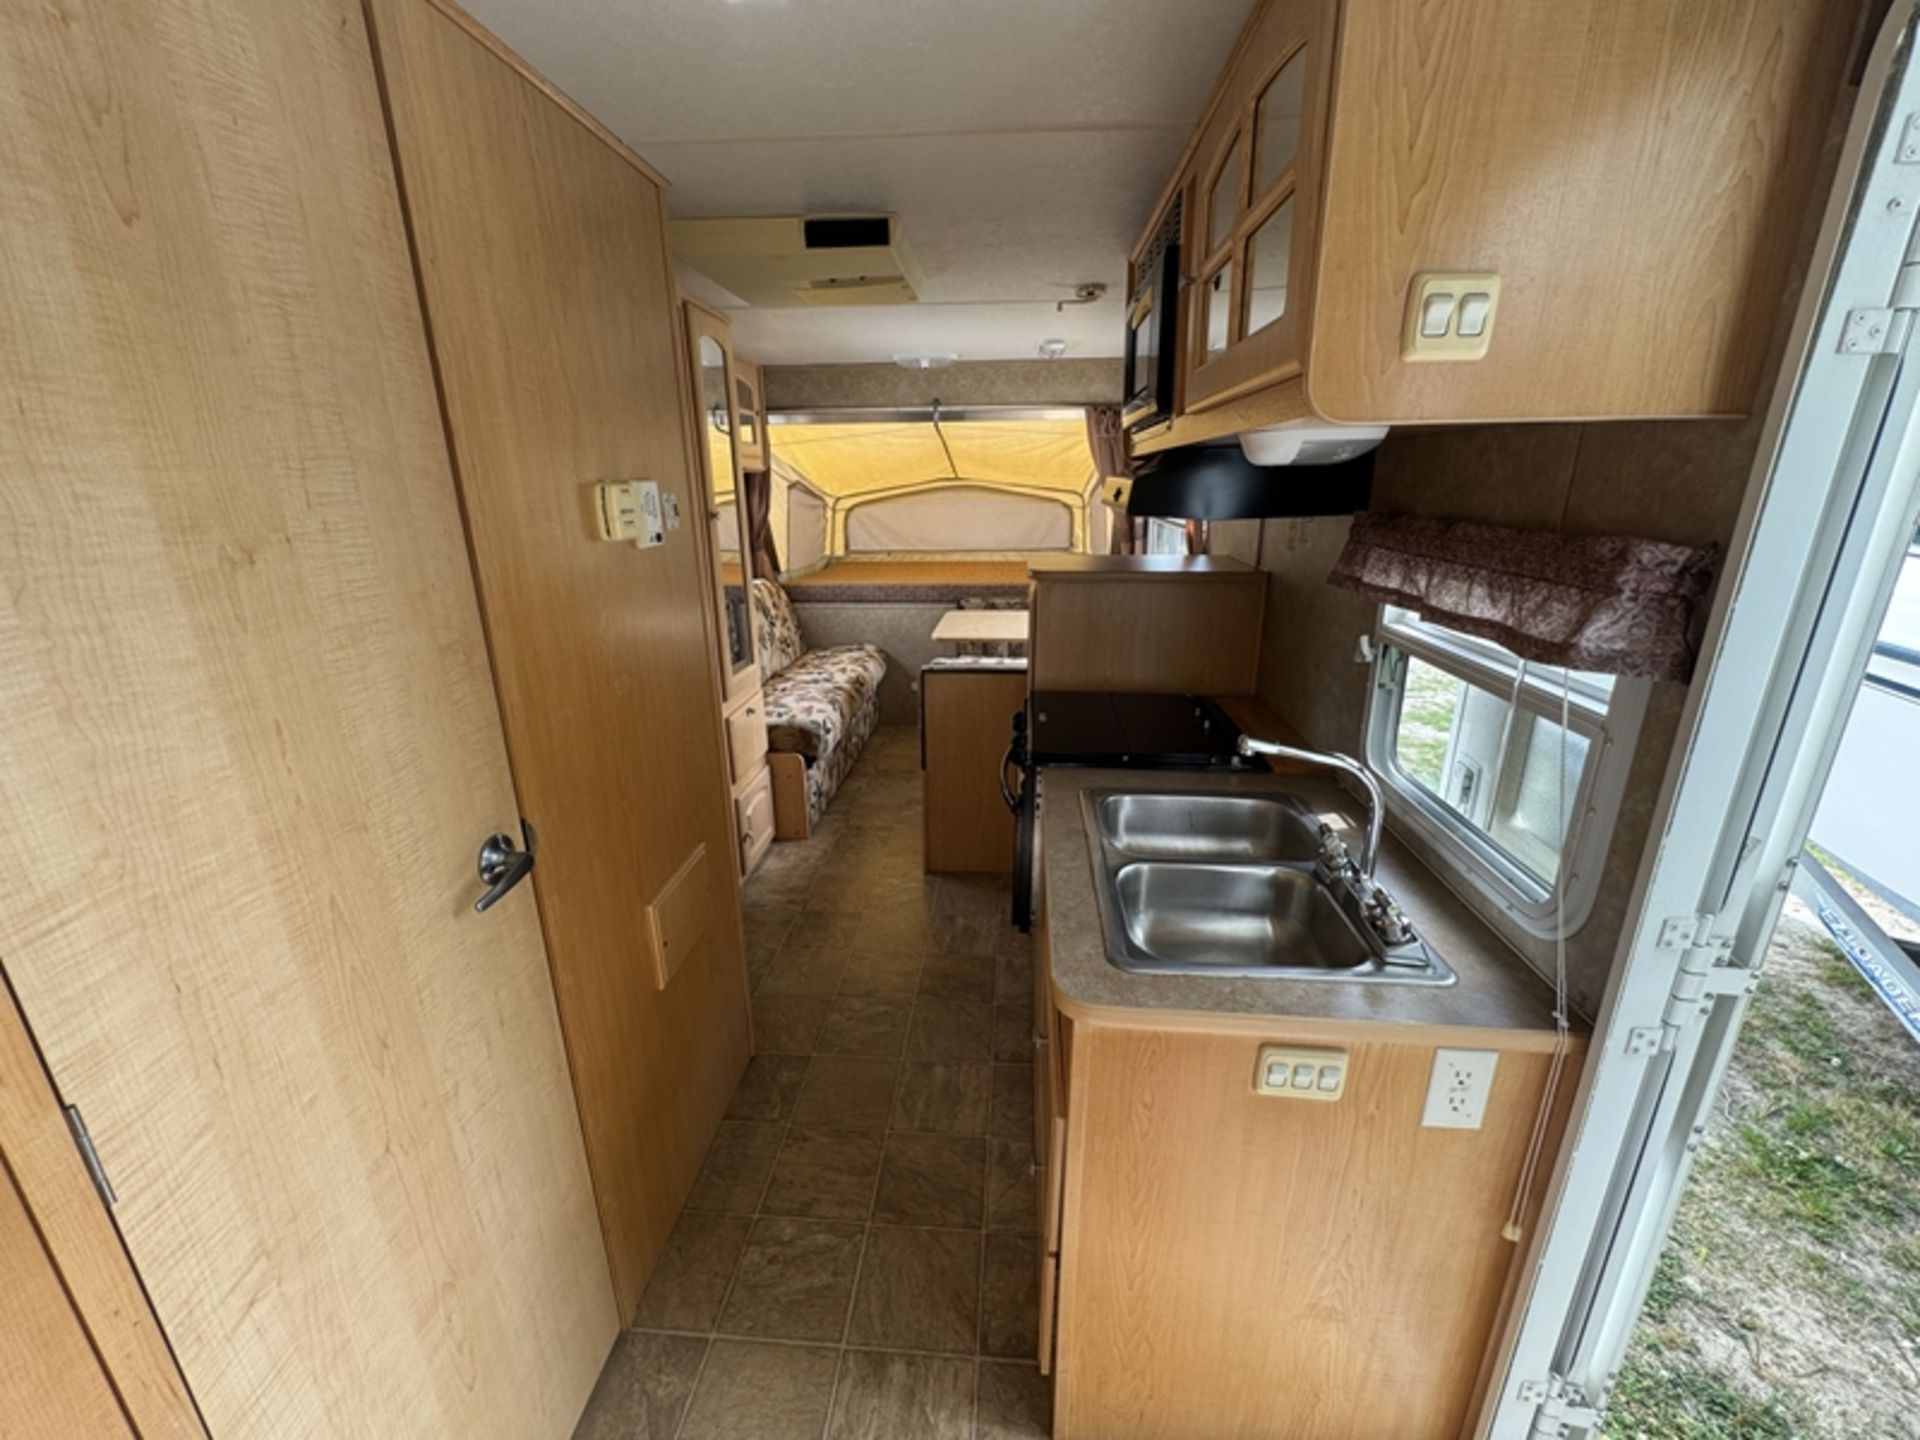 2005 STARCRAFT Travel Star travel trailer camper with pop outs - 1SATS02L351EC3406 - Image 7 of 10